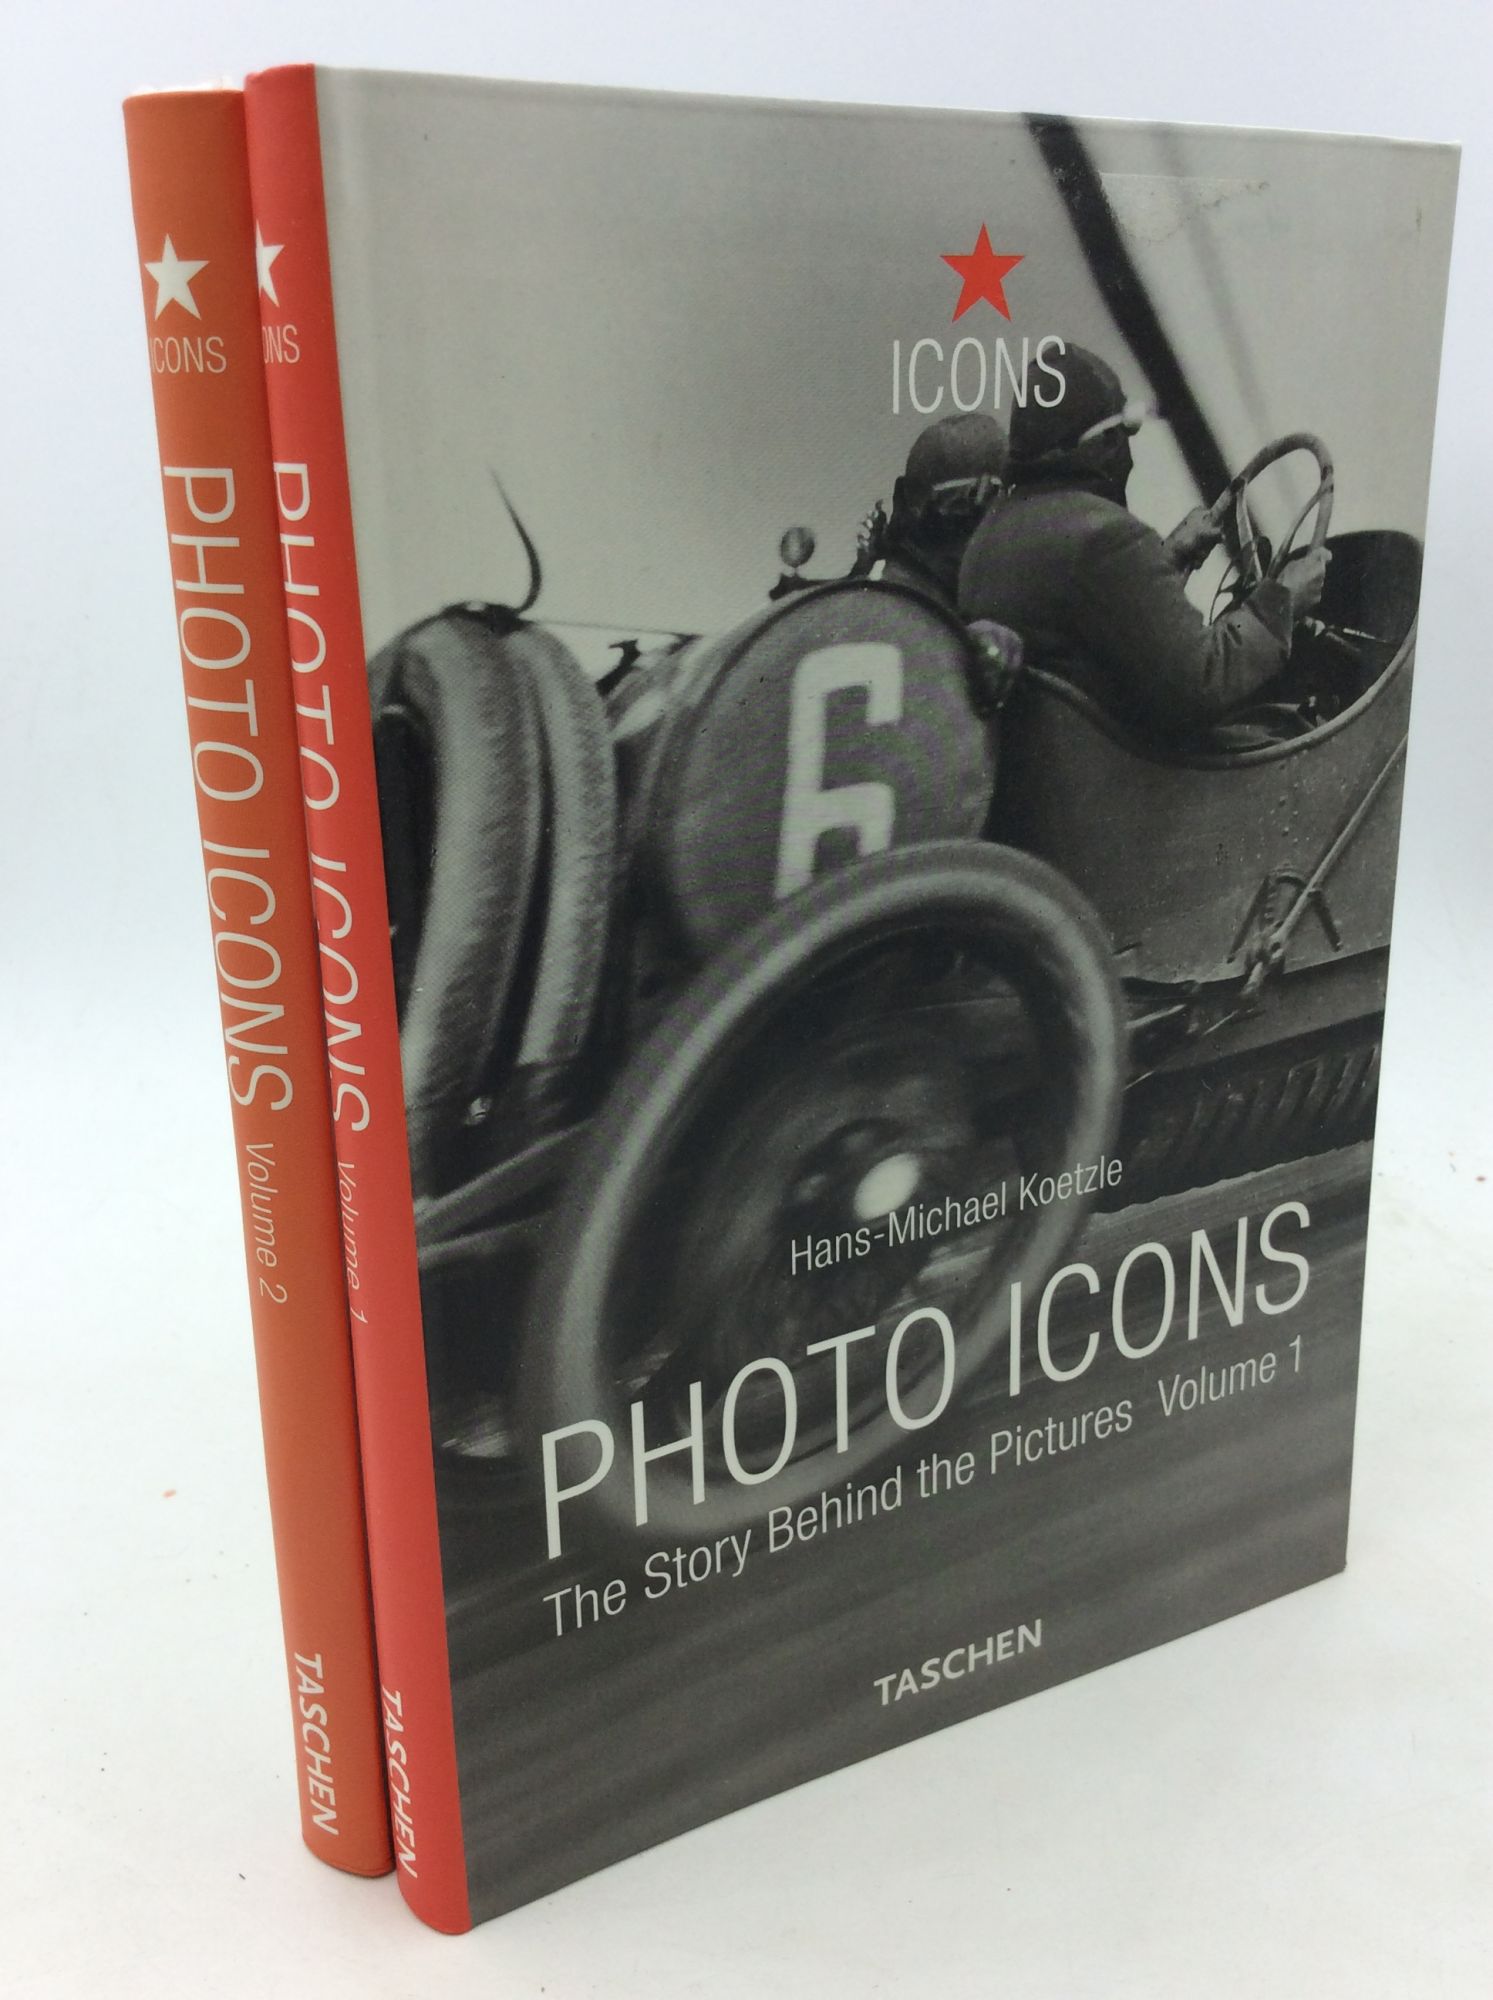 PHOTO ICONS: The Story Behind the Pictures, Volumes I-II